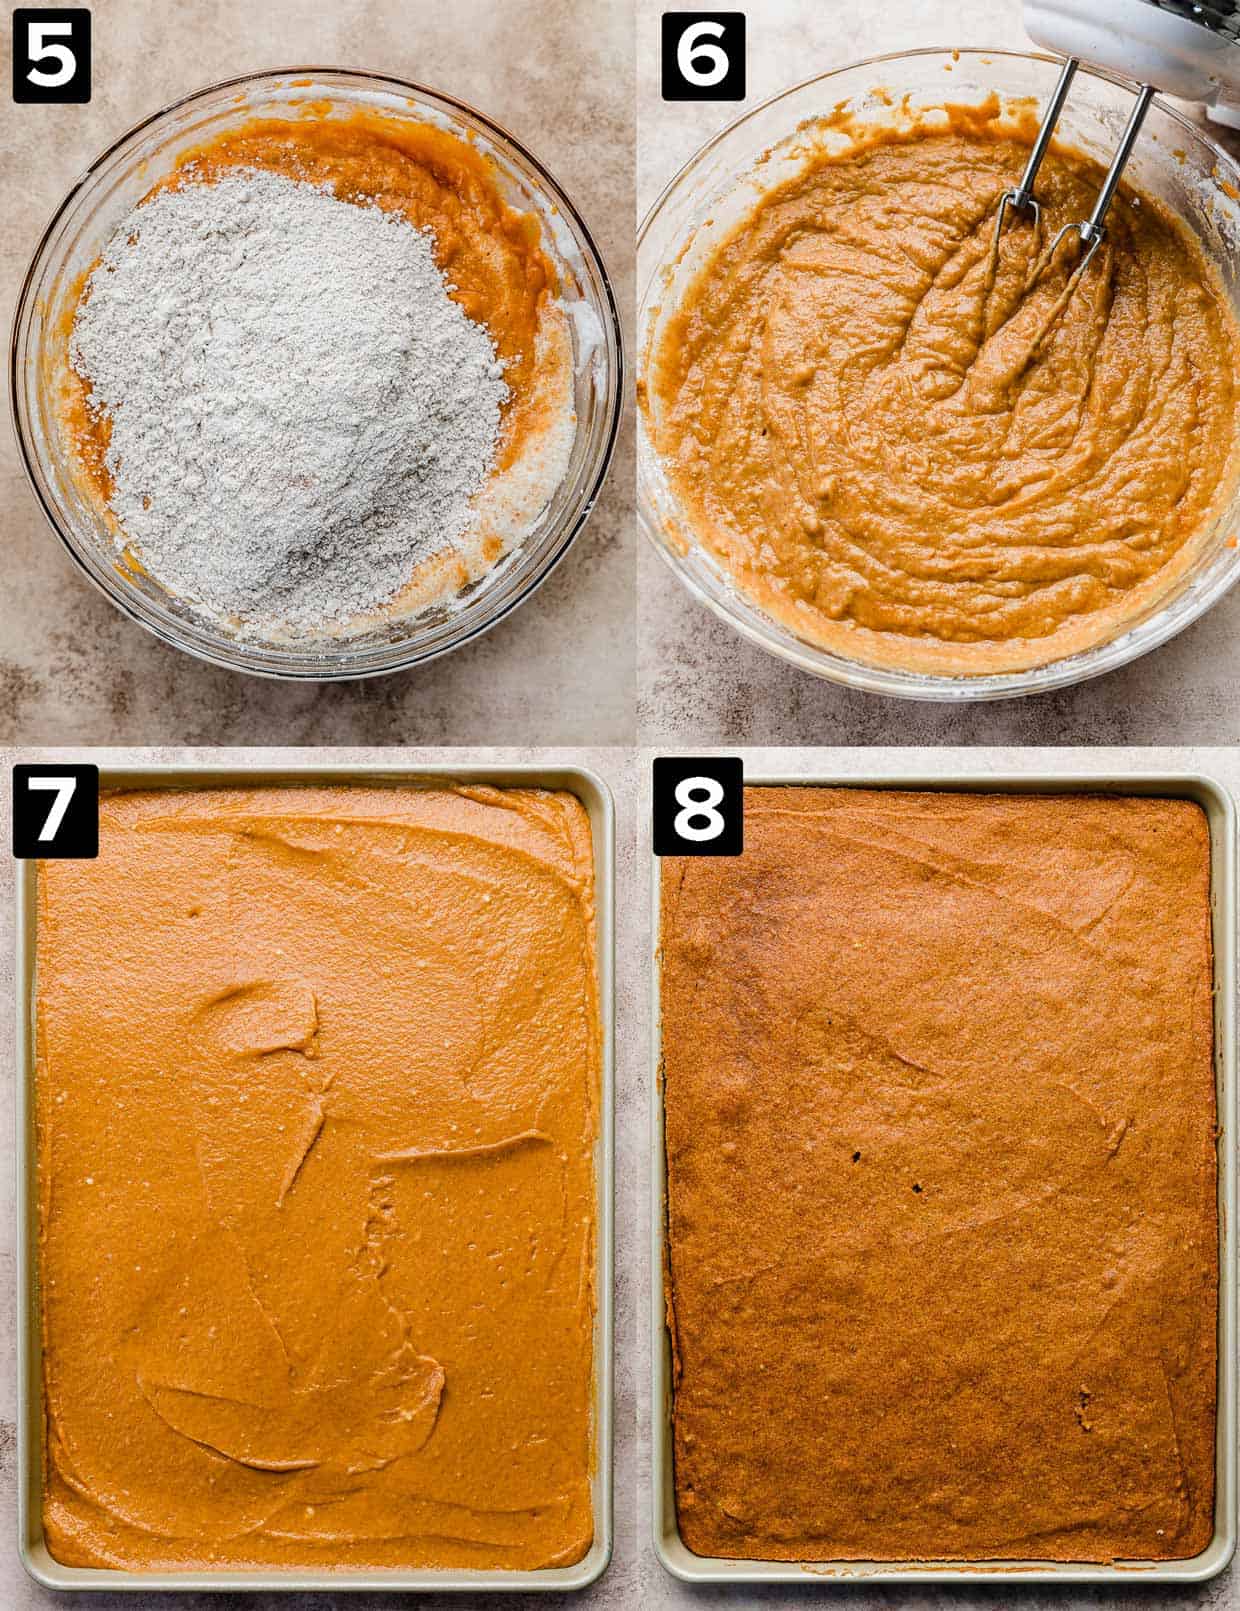 Four photo collage: top left dry ingredients in a glass bowl over pumpkin puree; top right photo is mixing pumpkin sheet cake batter in a bowl, bottom left is a sheet pan with batter in it, and bottom right is baked Pumpkin Bars.